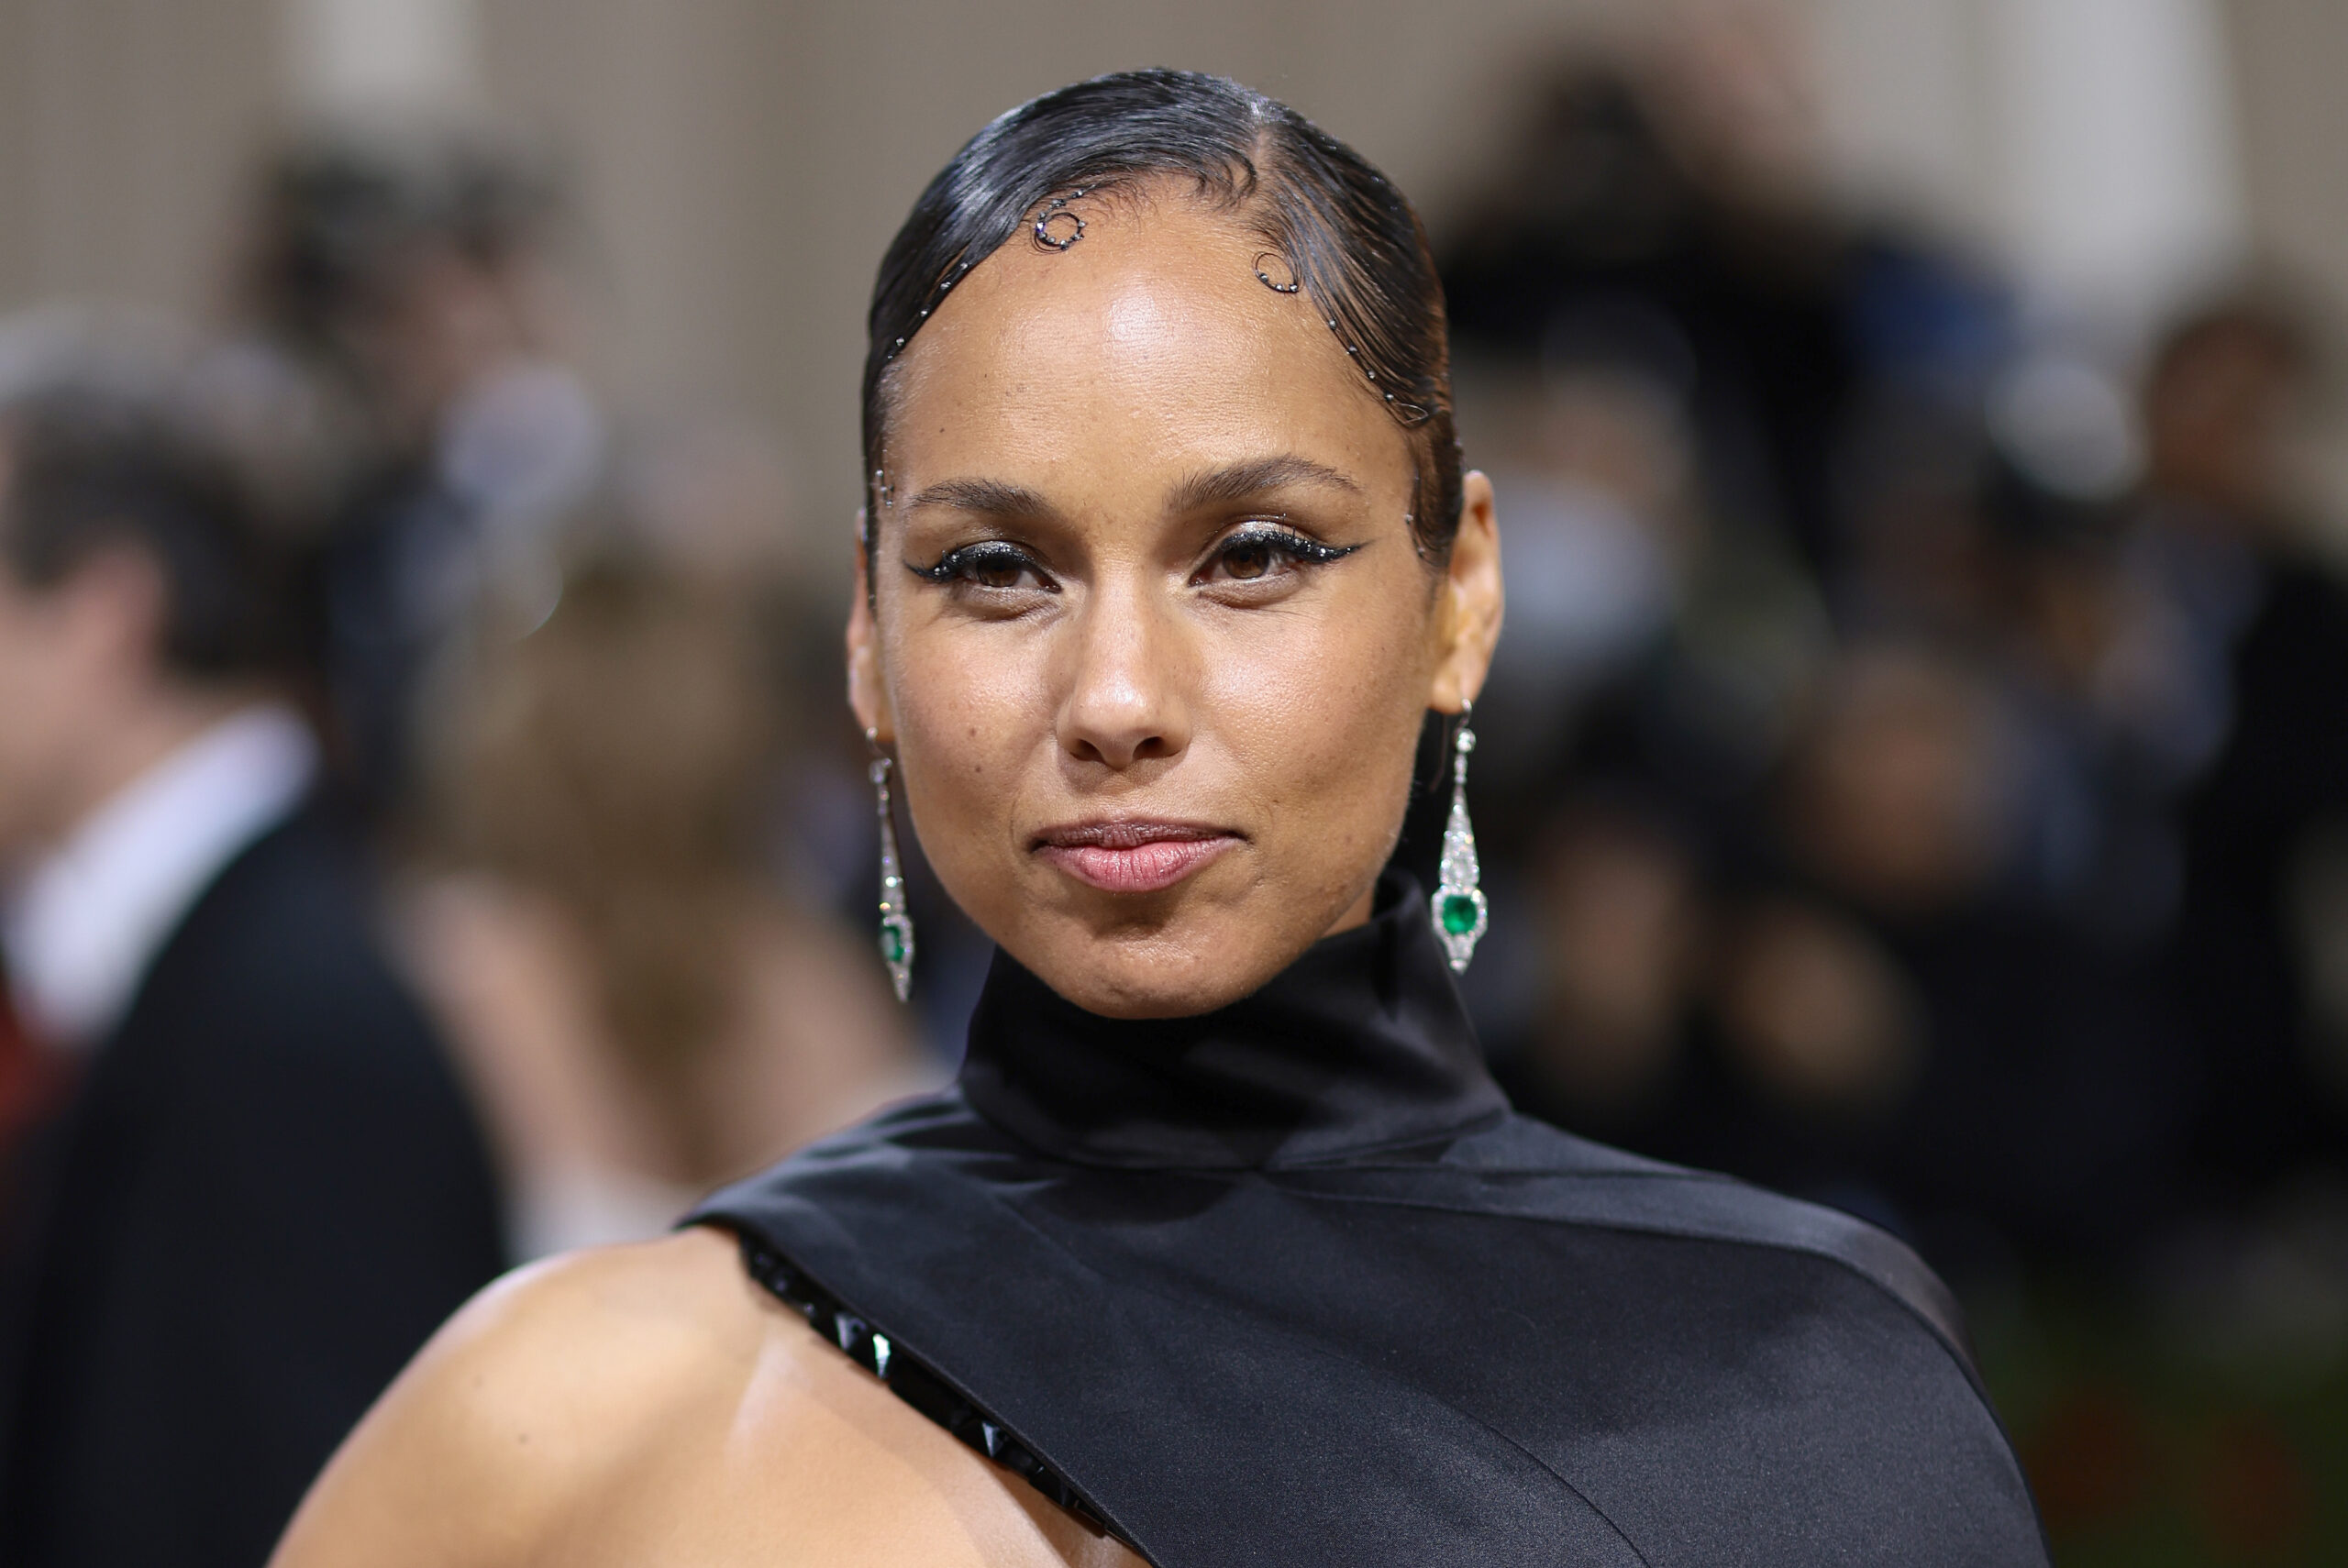 Alicia Keys Gets Grabbed and Kissed by a Fan During Concert Performance, the Singer and Fans React